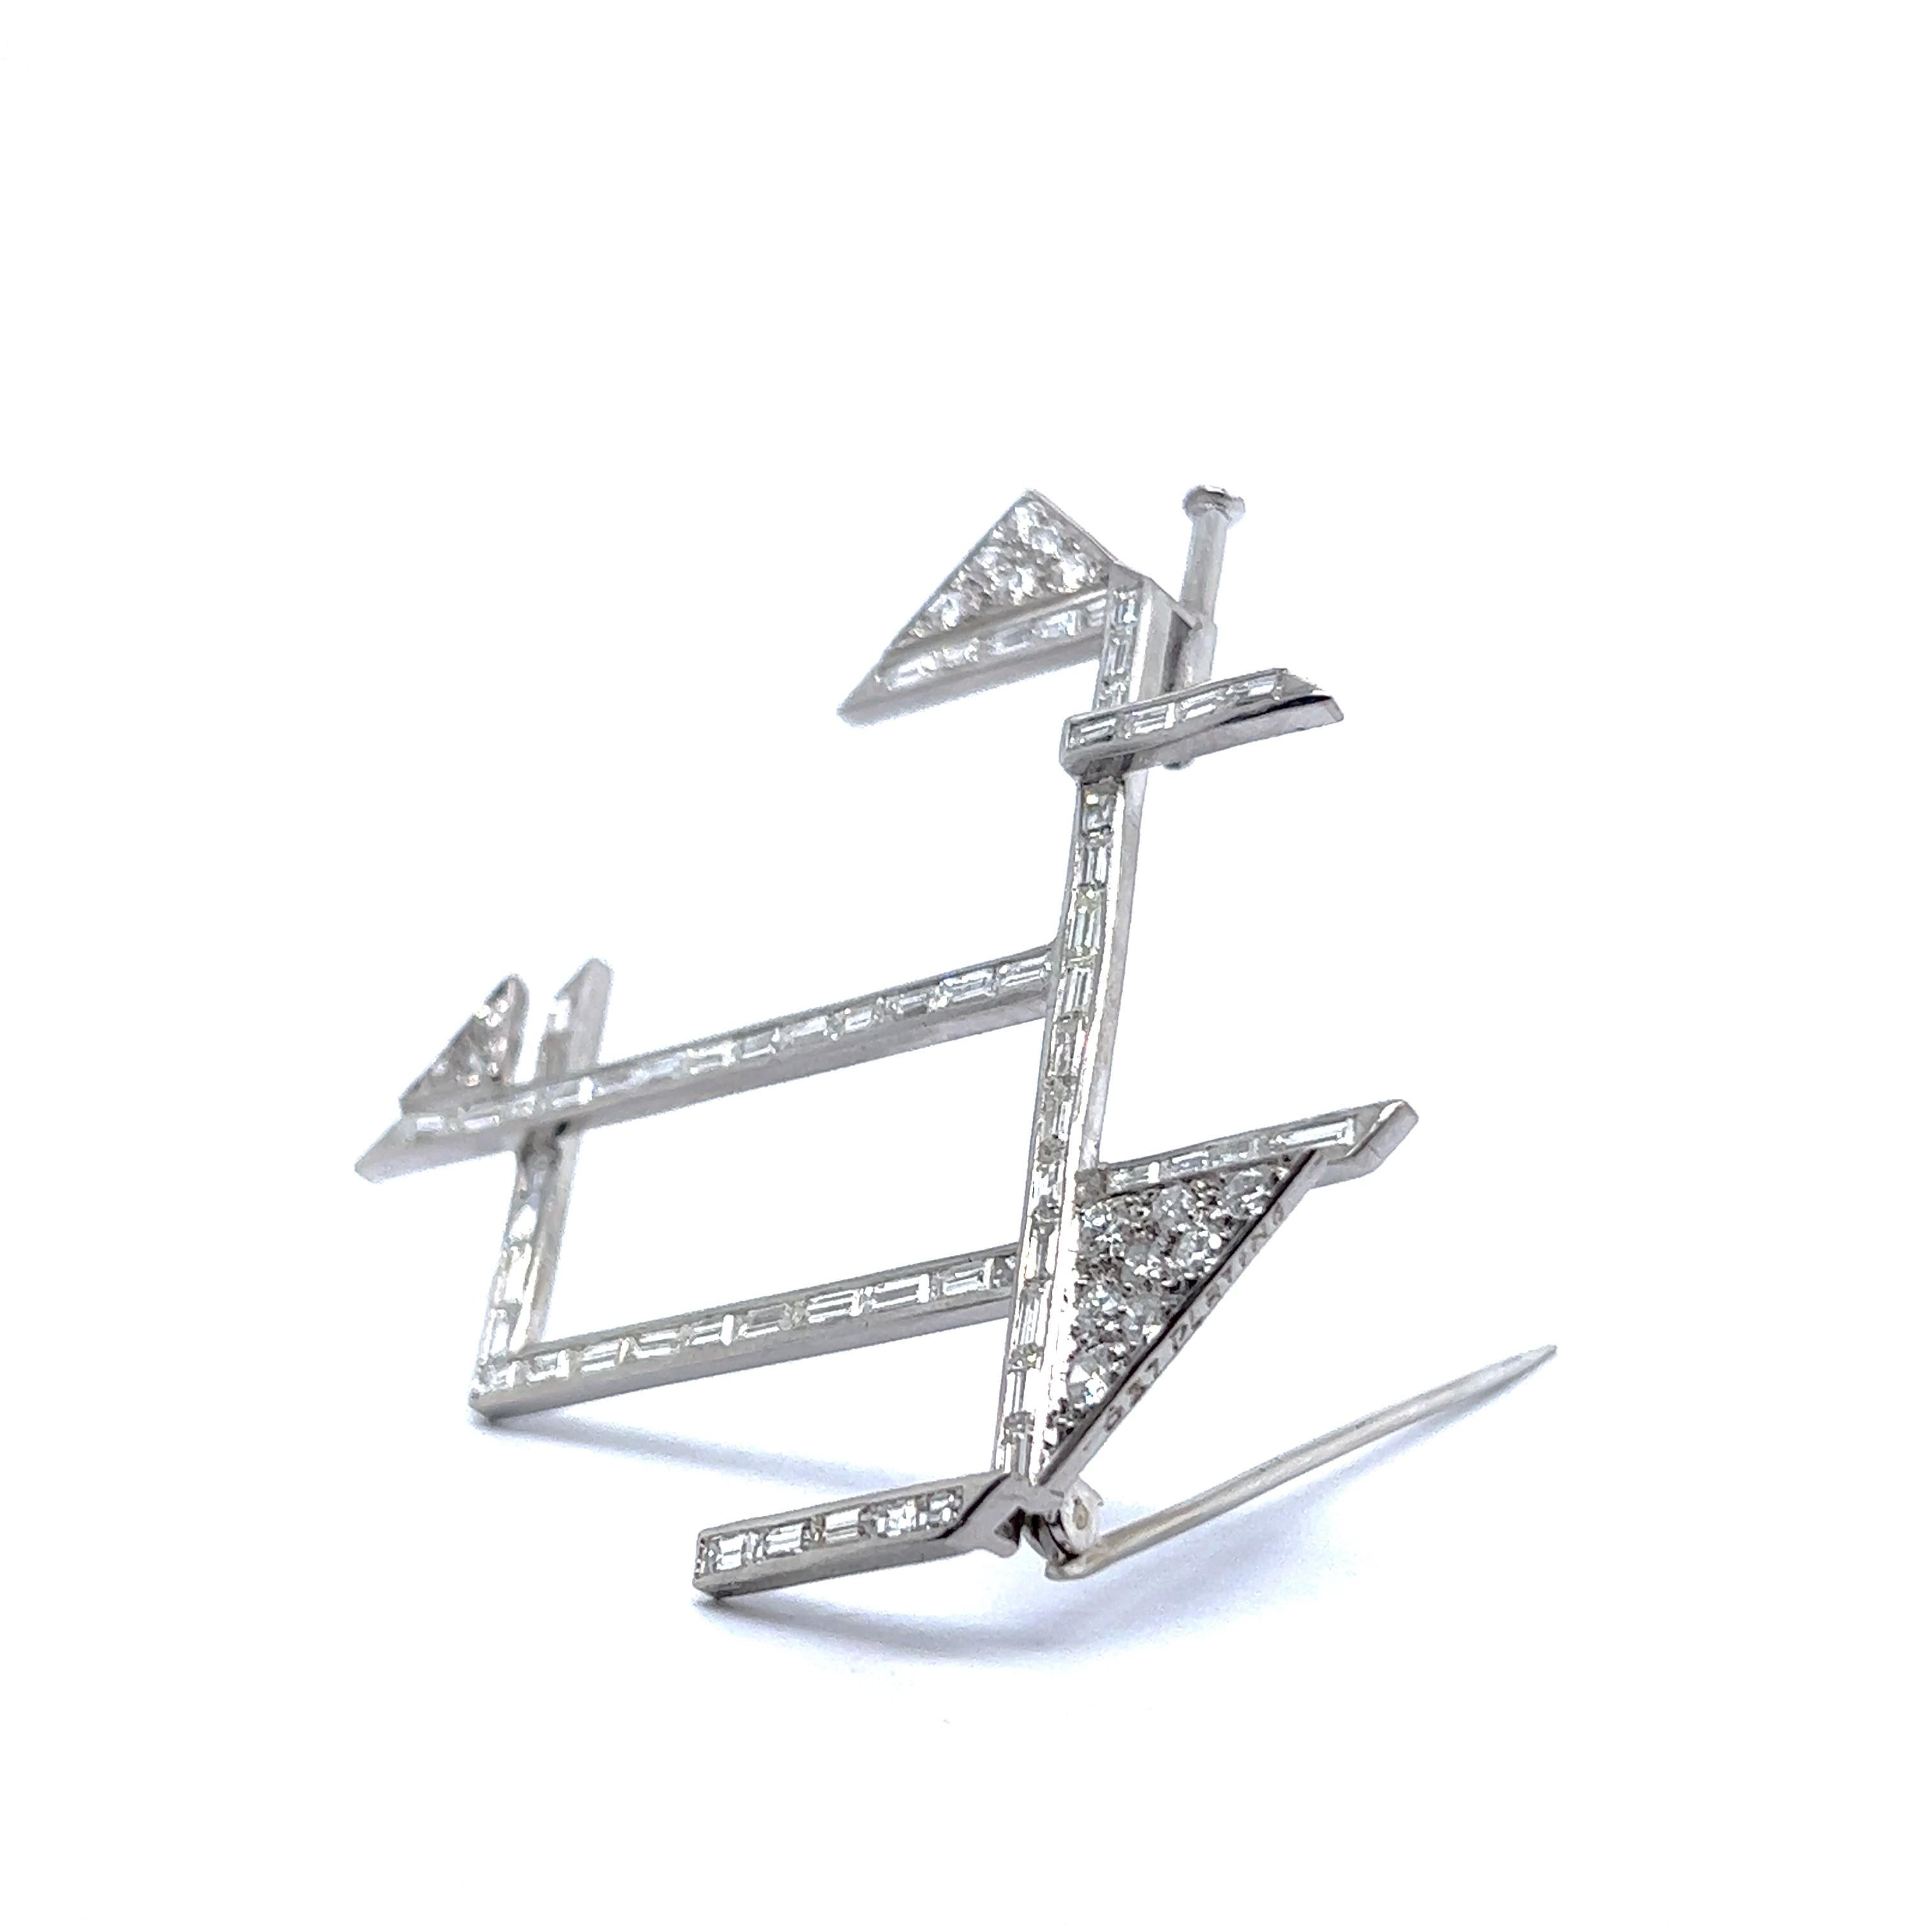 Introducing an exquisite geometric brooch in platinum with diamonds,  that embodies the essence of modernism. Drawing inspiration from the works of Kandinsky and the Bauhaus aesthetic, this jewelry piece seamlessly melds avant-garde elements with